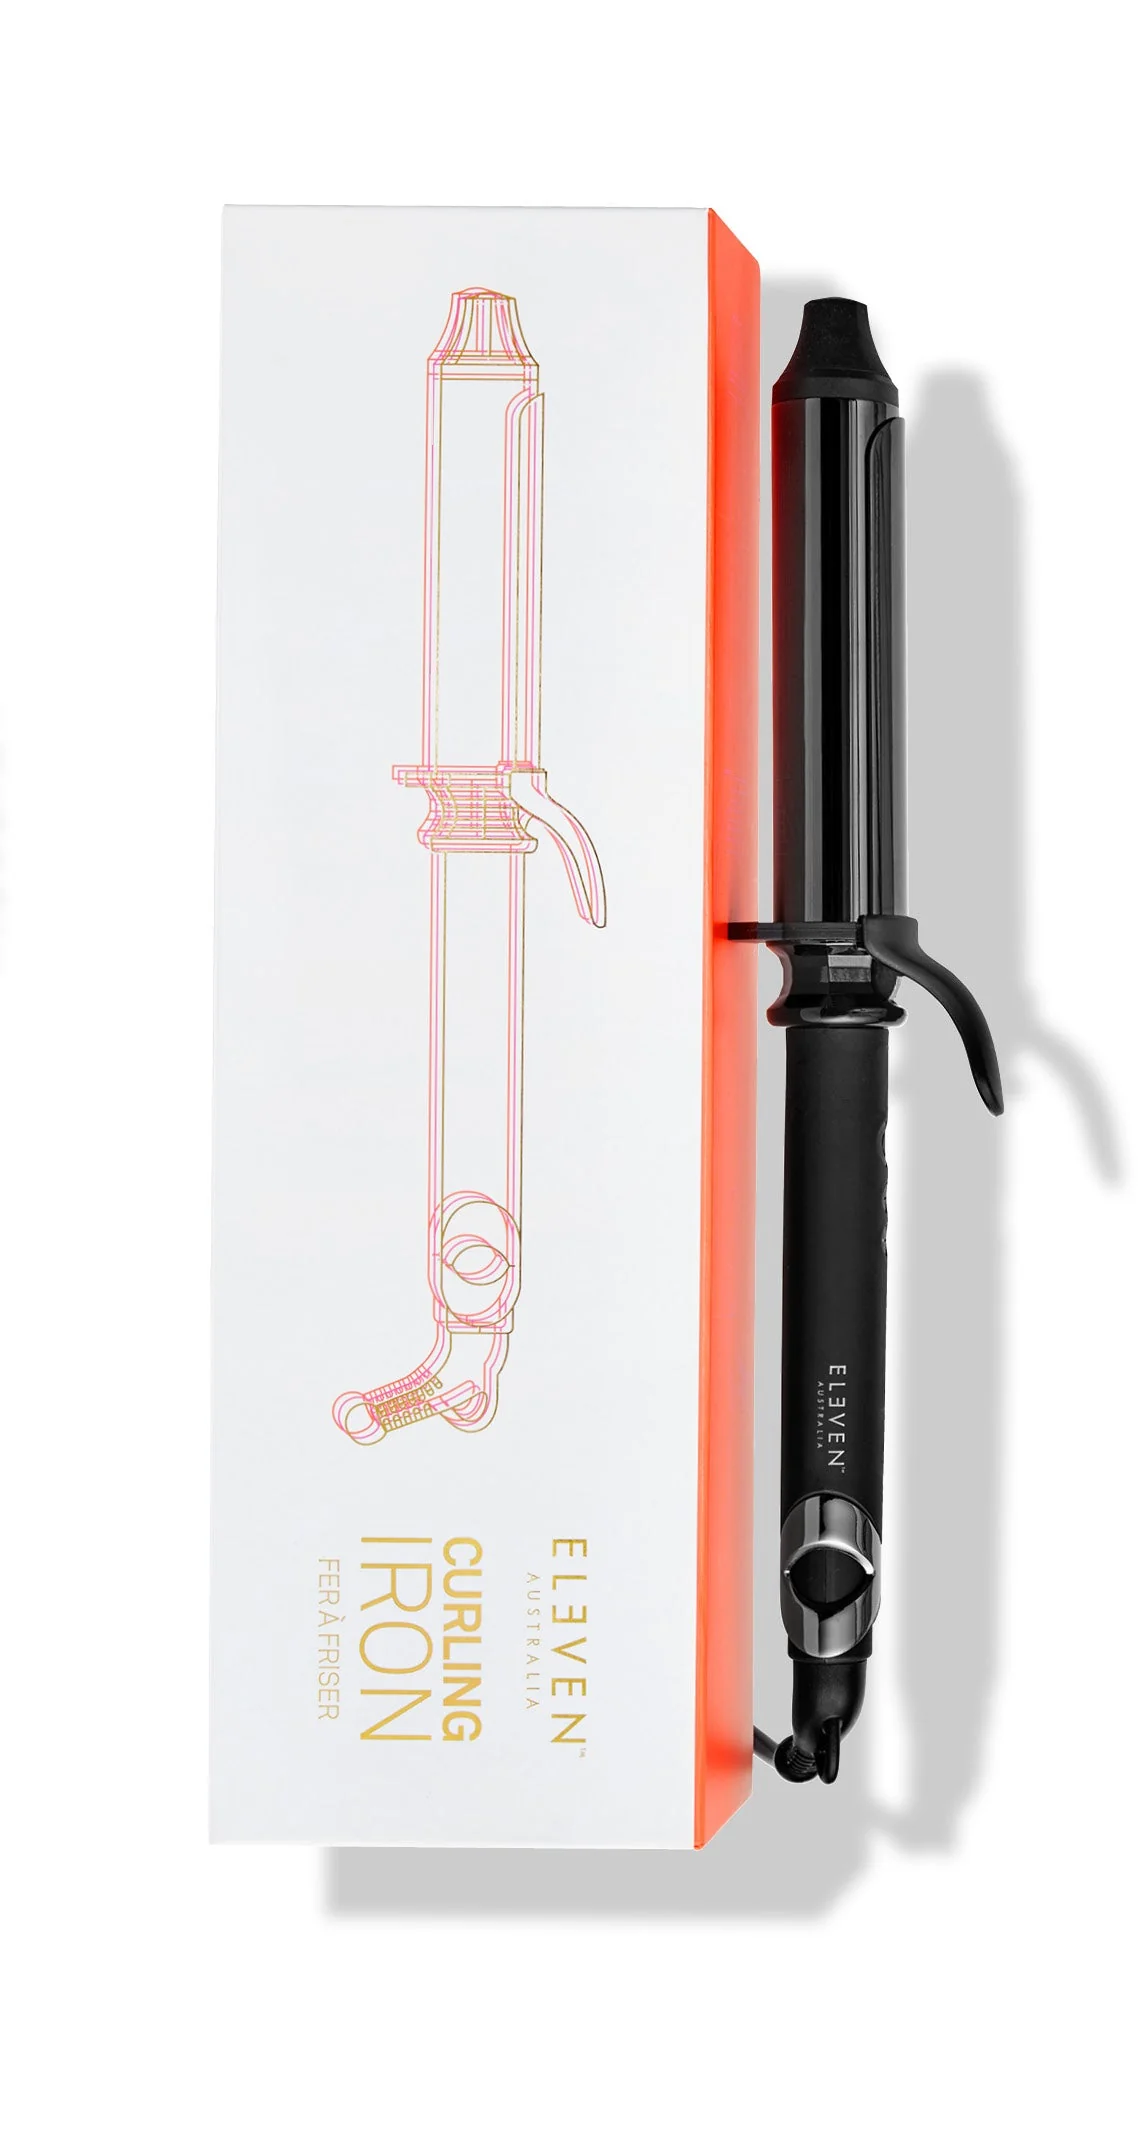 Eleven Curling Iron